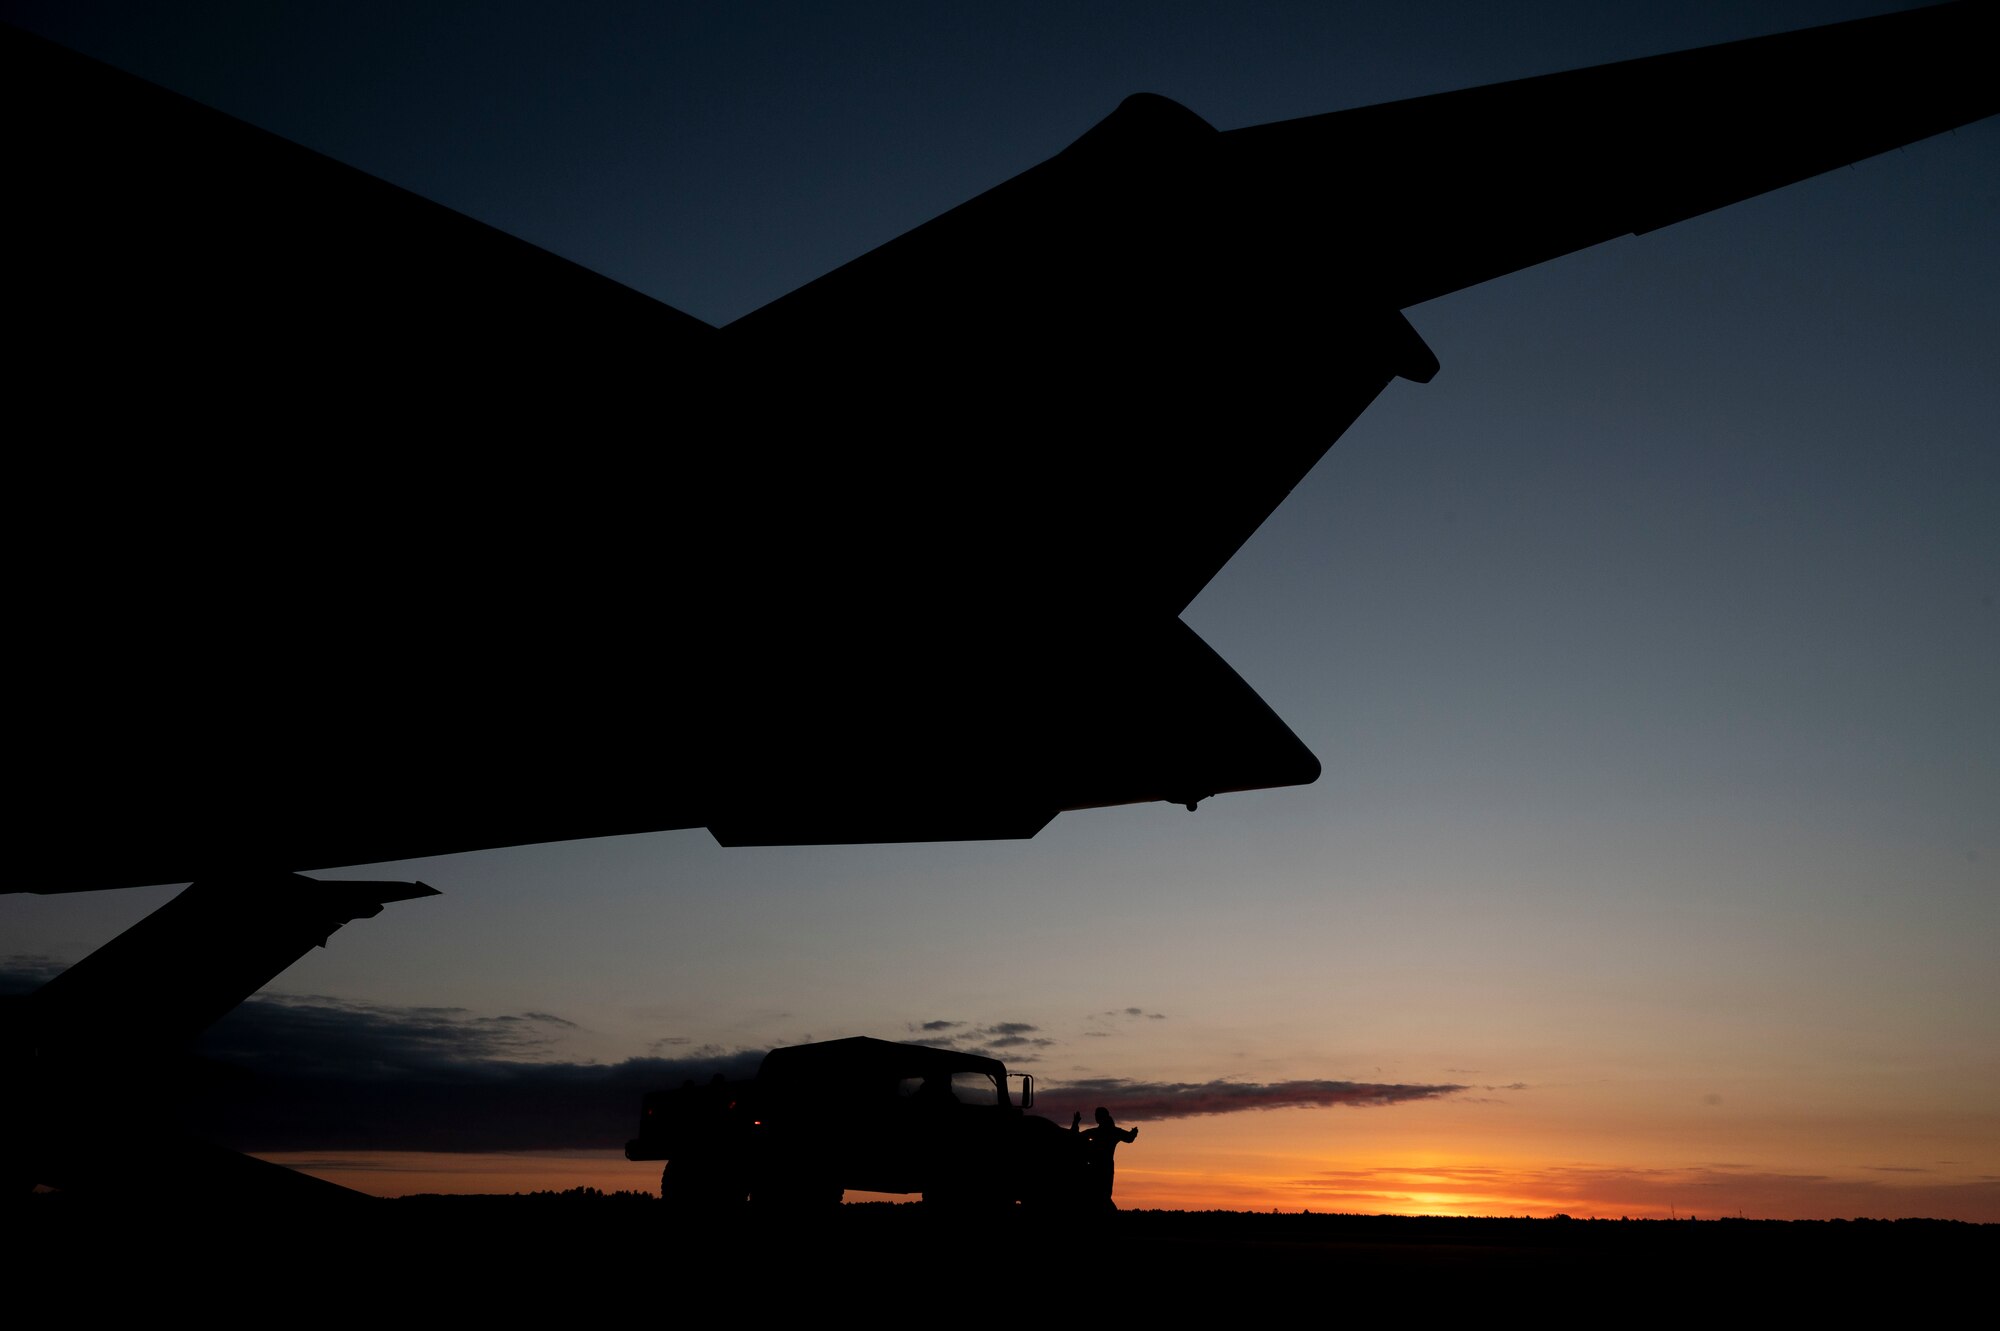 U.S. Airmen from the 321st Contingency Response Squadron prepare to load an MRZR all-terrain vehicle on the back of a C-17 Globemaster III at Alpena Combat Readiness Training Center, Michigan, May 24, 2021, in support of Exercise Mobility Guardian 2021. In an effort to become the lightest, leanest, most agile combat effective force possible, the 621st Contingency Response Wing’s custom-designed contingency location team changes the way the Air Force looks at Agile Combat Employment. (U.S. Air Force photo by Senior Airman Aaron Irvin)